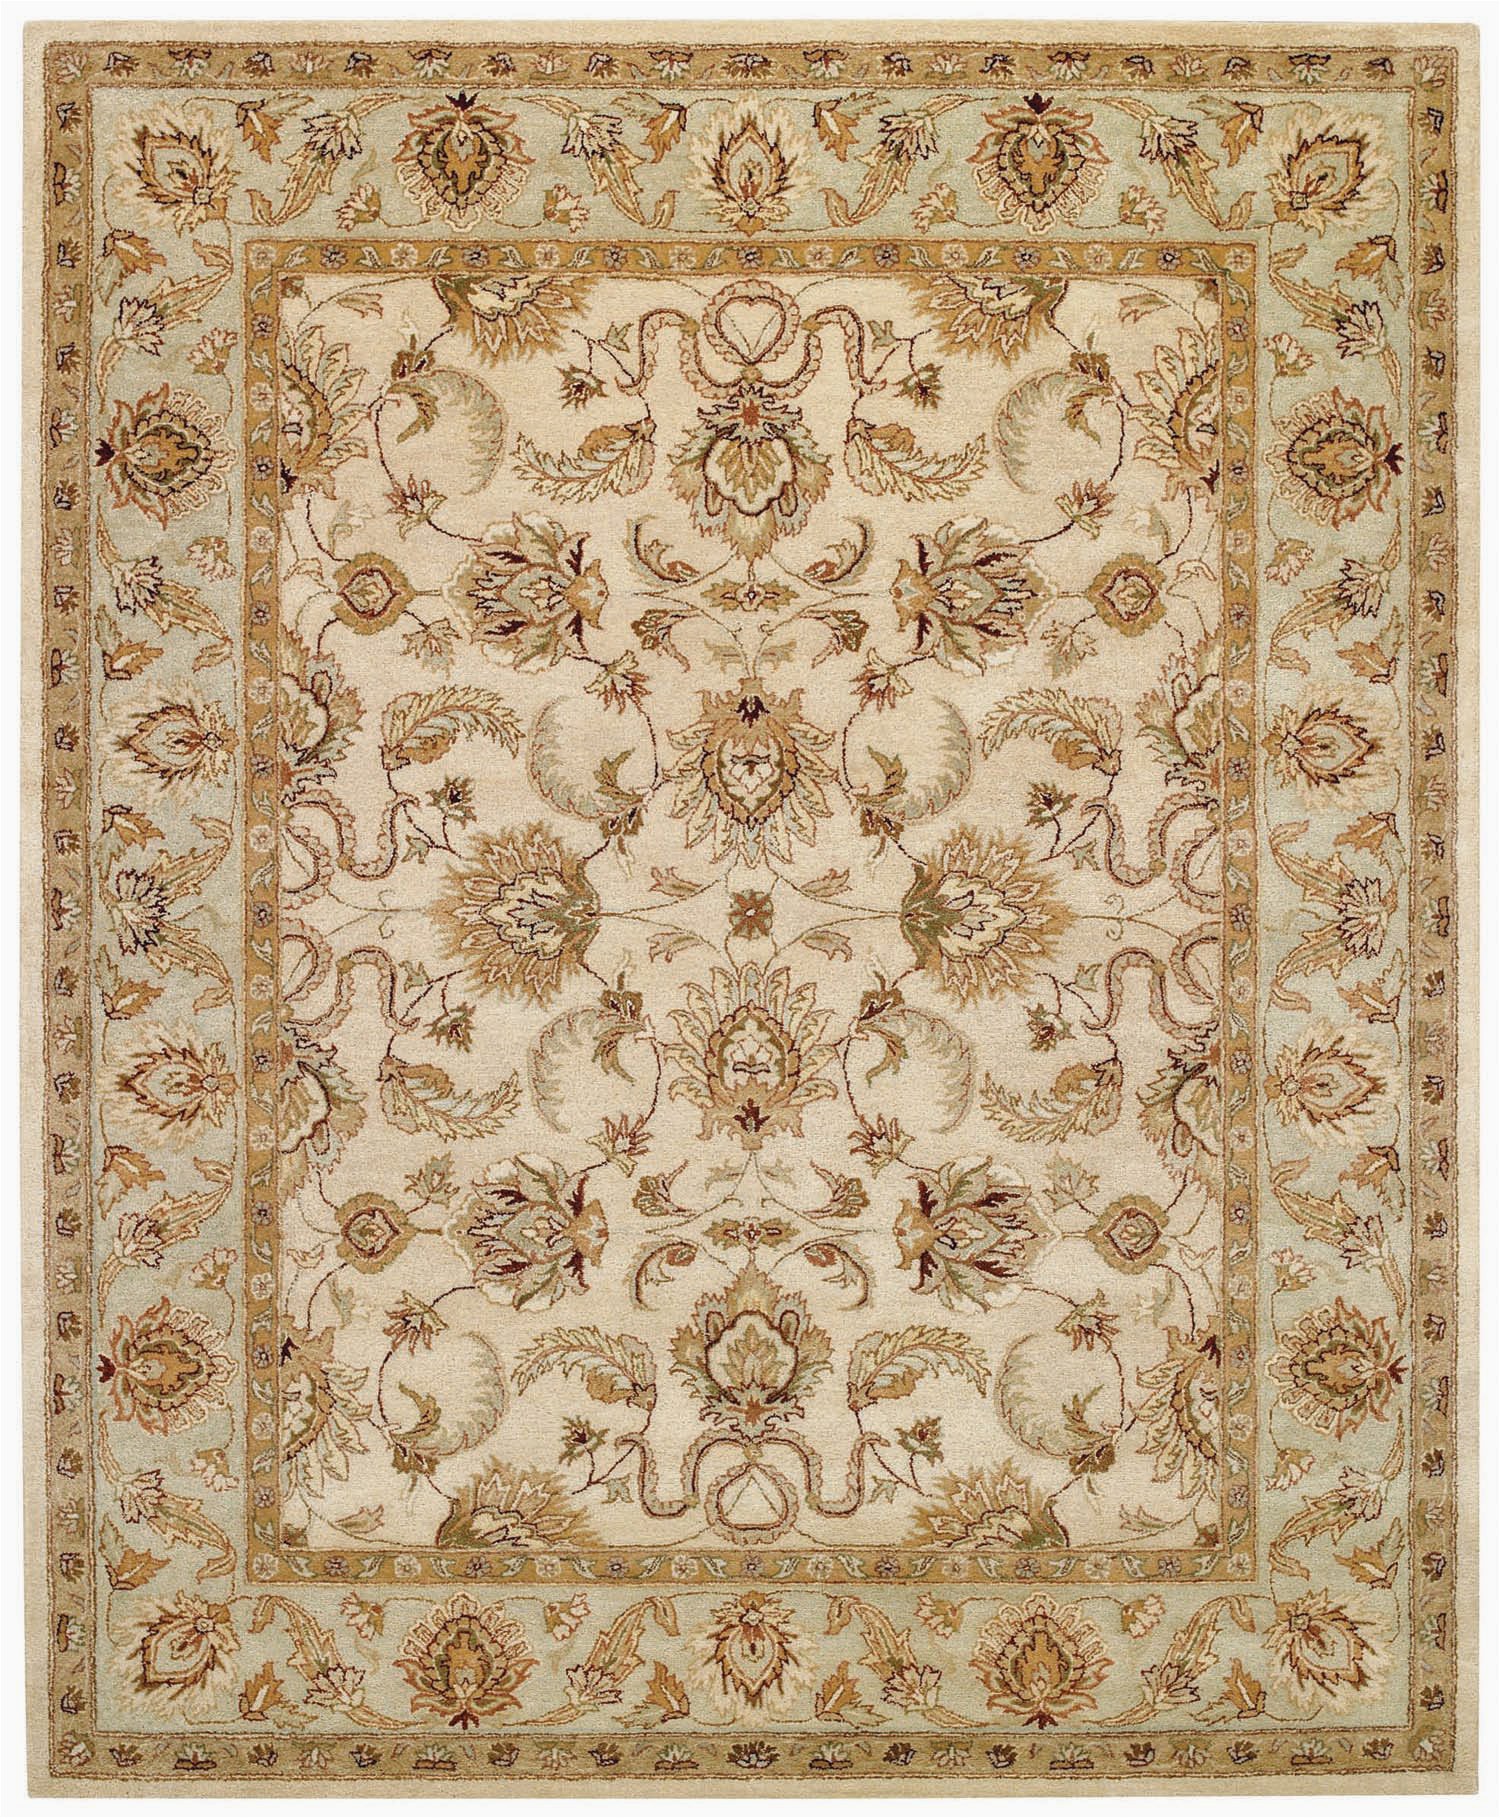 Area Rugs On Clearance Free Shipping Capel Monticello Meshed 3313 Beige Spa 700 area Rug